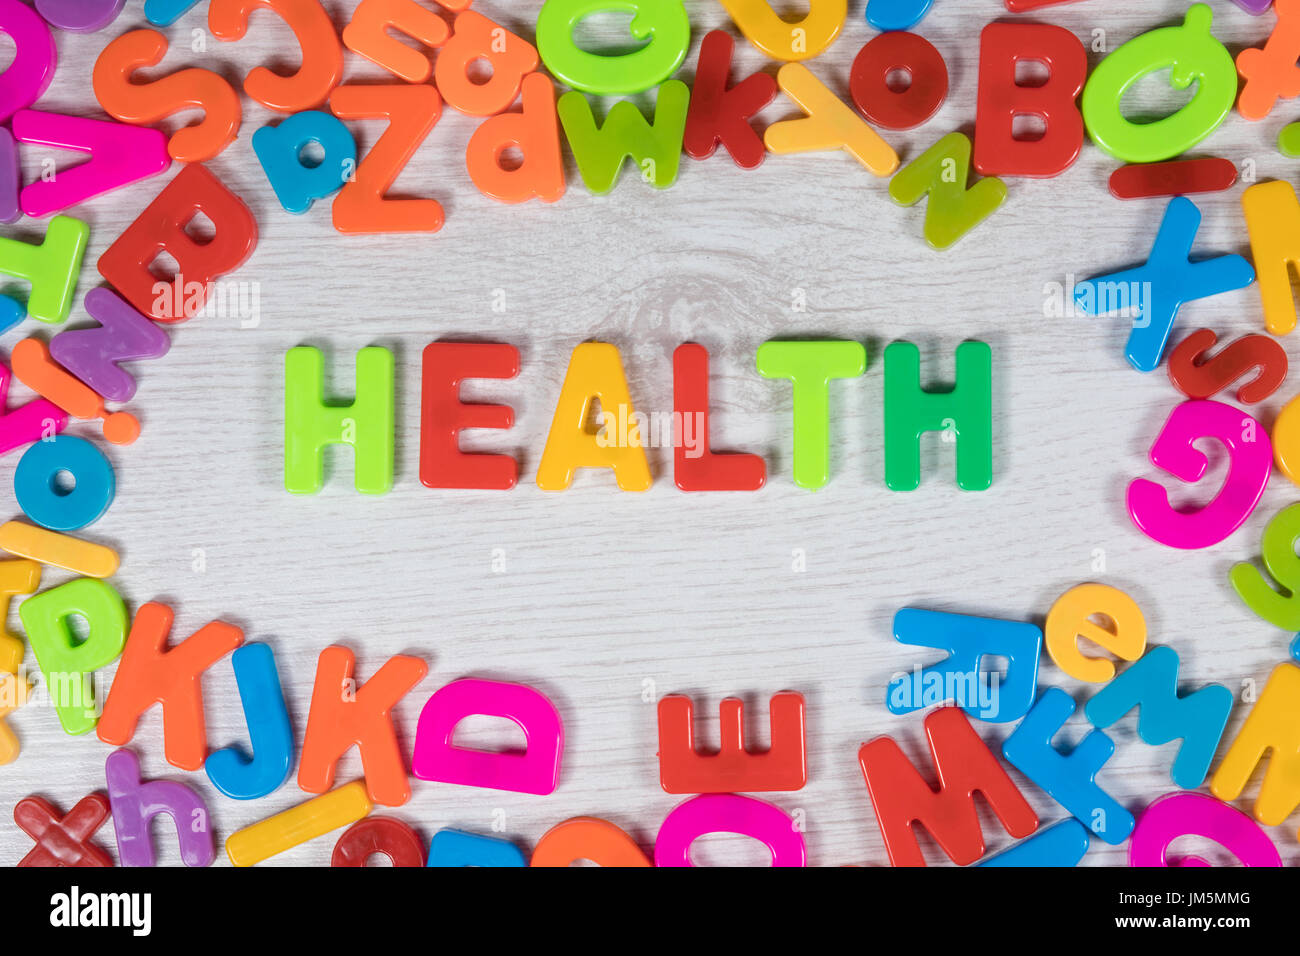 Plastic magnet letters in bright colors make border around the word health against a painted wood background Stock Photo